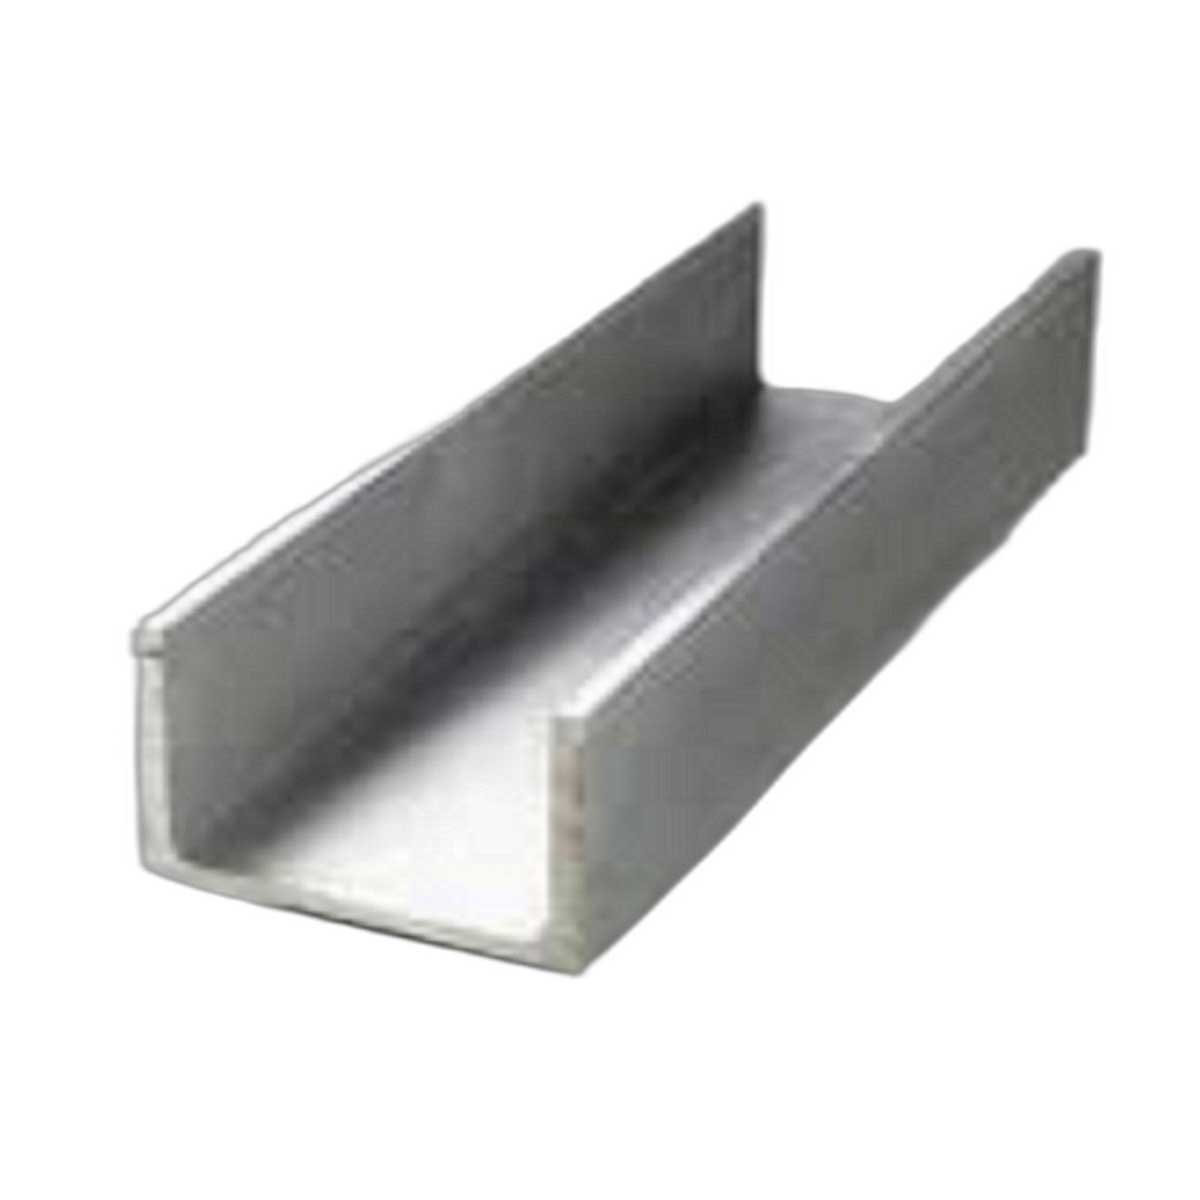 Aluminium U Shaped Channel Manufacturers, Suppliers in Saharanpur